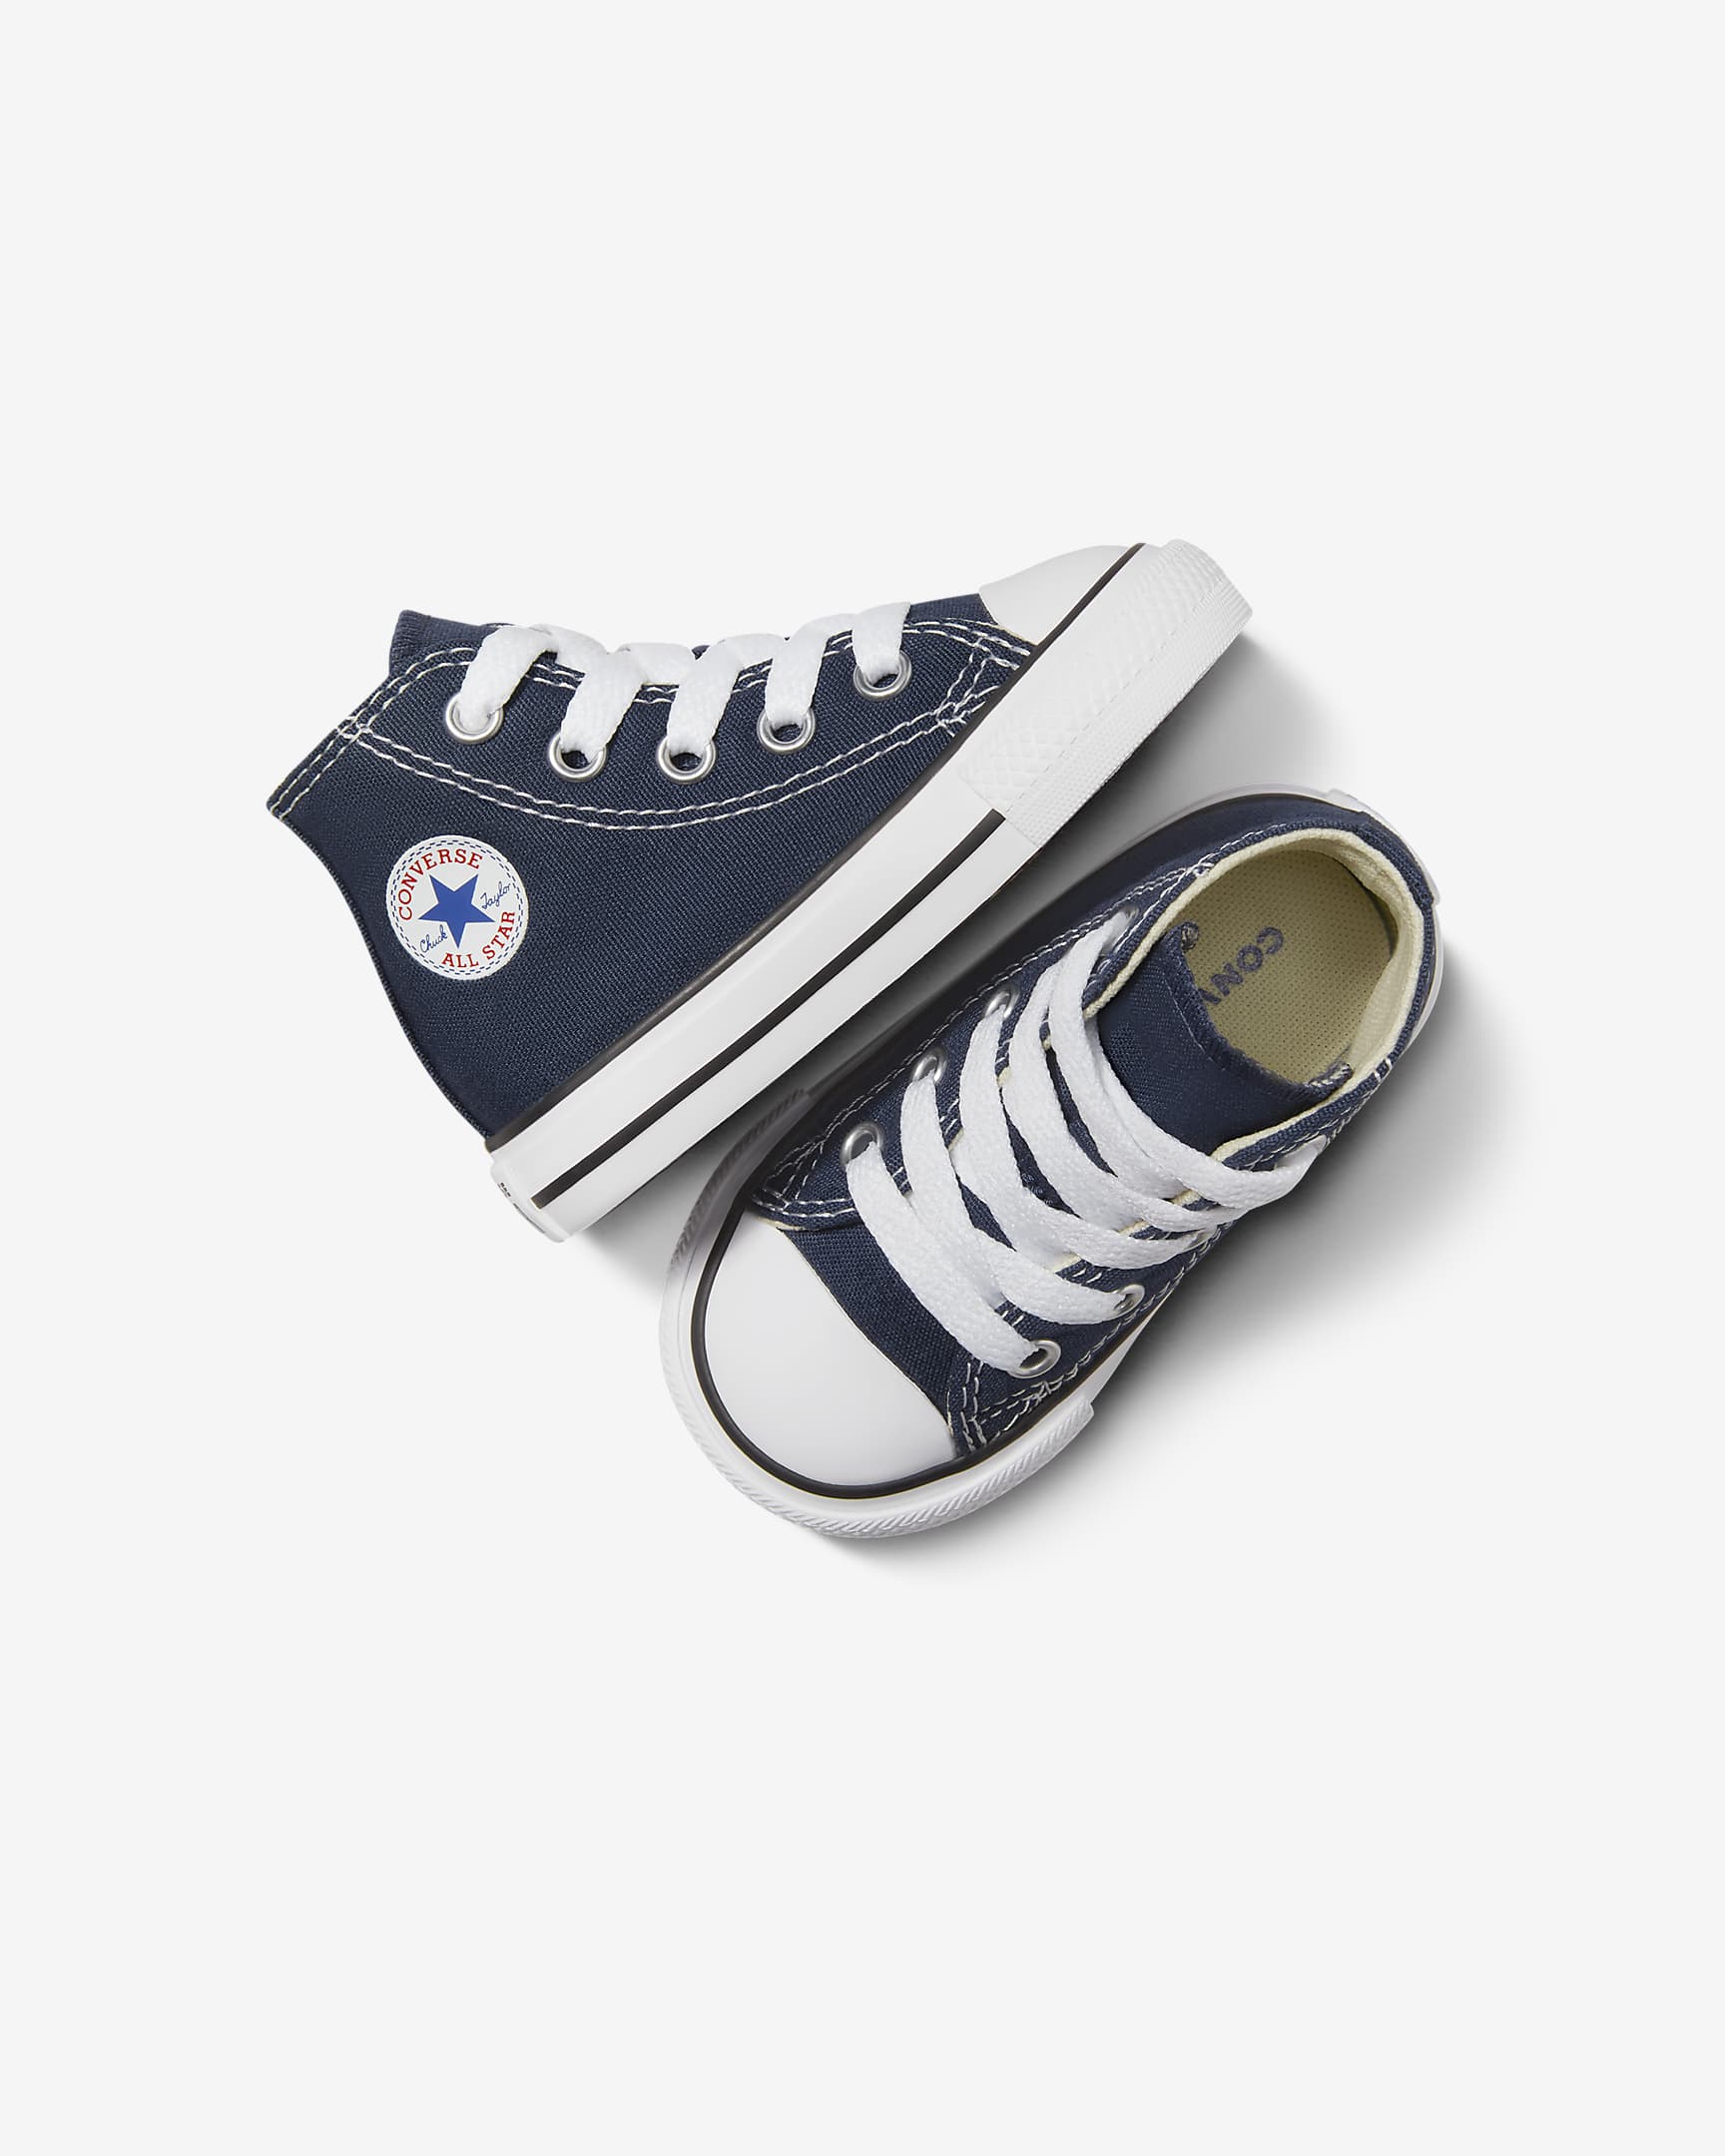 Converse Chuck Taylor All Star High Top (2c-10c) Infant/Toddler Shoe ...